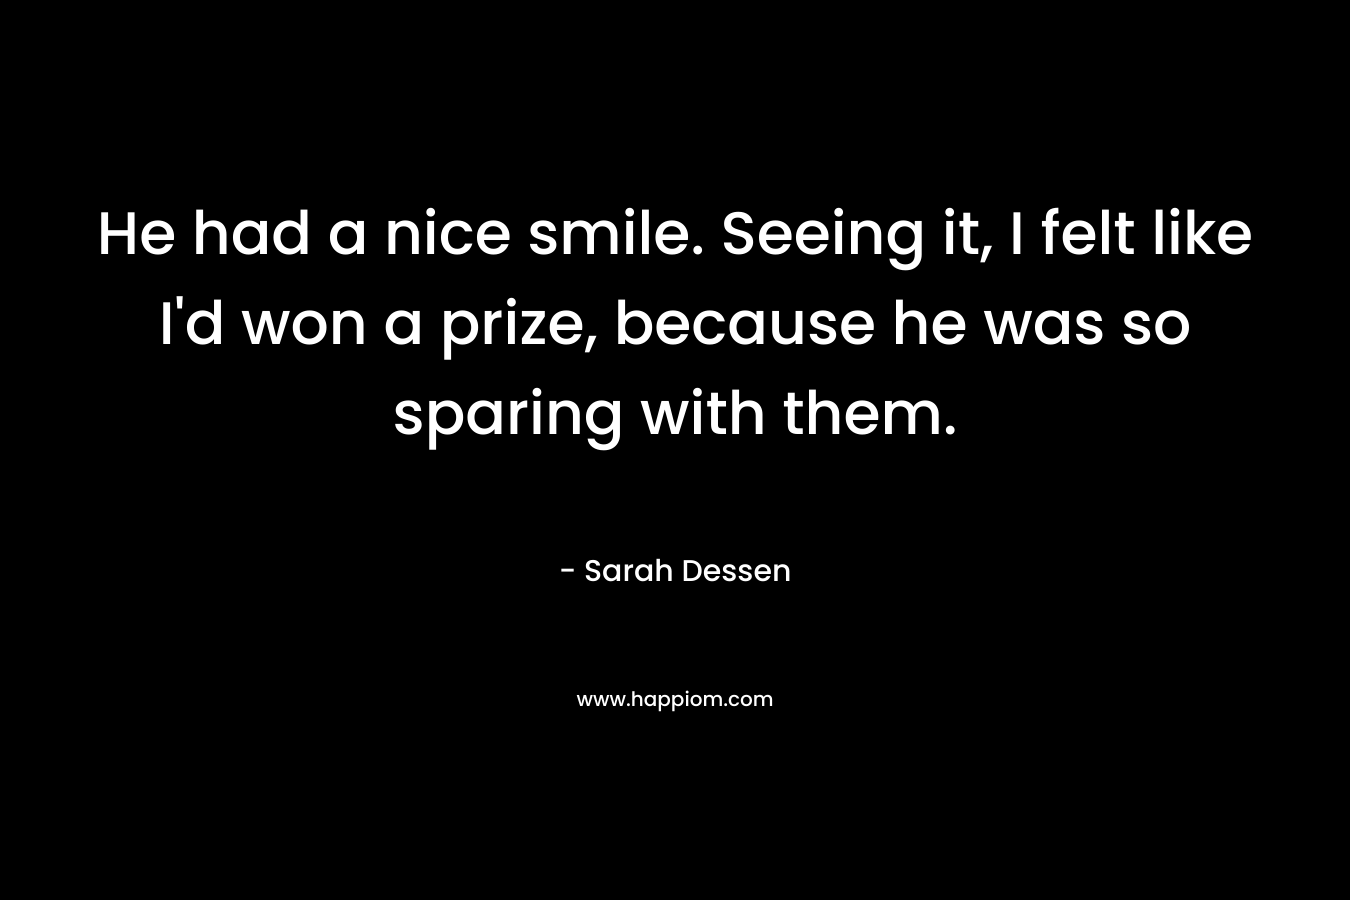 He had a nice 				smile. Seeing it, I felt like I’d won a prize, because he was so sparing with them. – Sarah Dessen